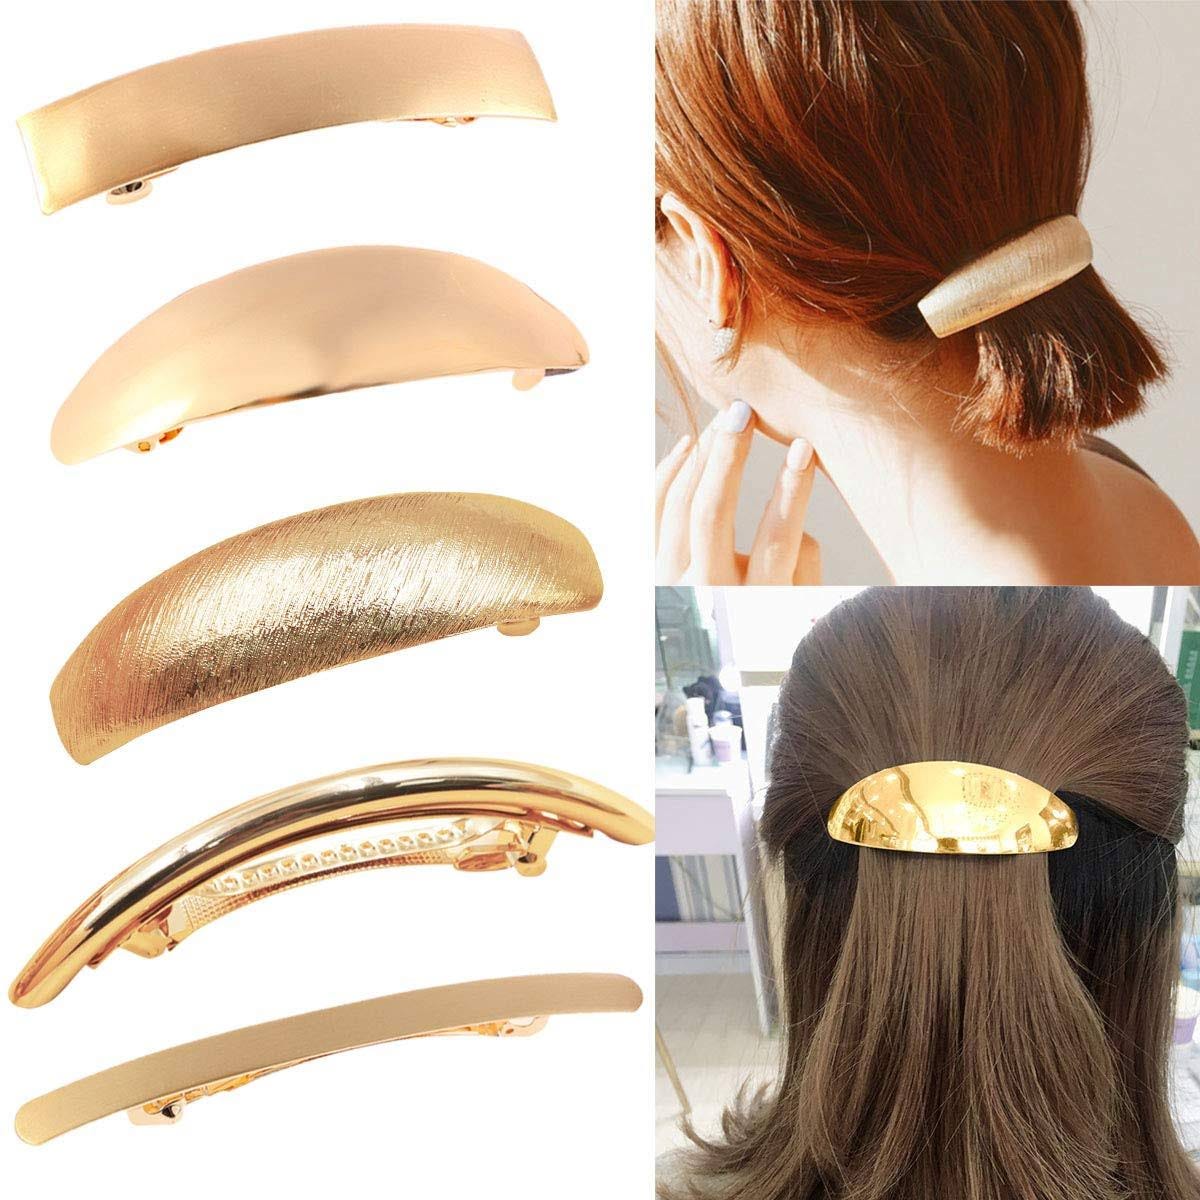 Inexpensive and Elegant Ladies' Hair Clips in Gold | Image